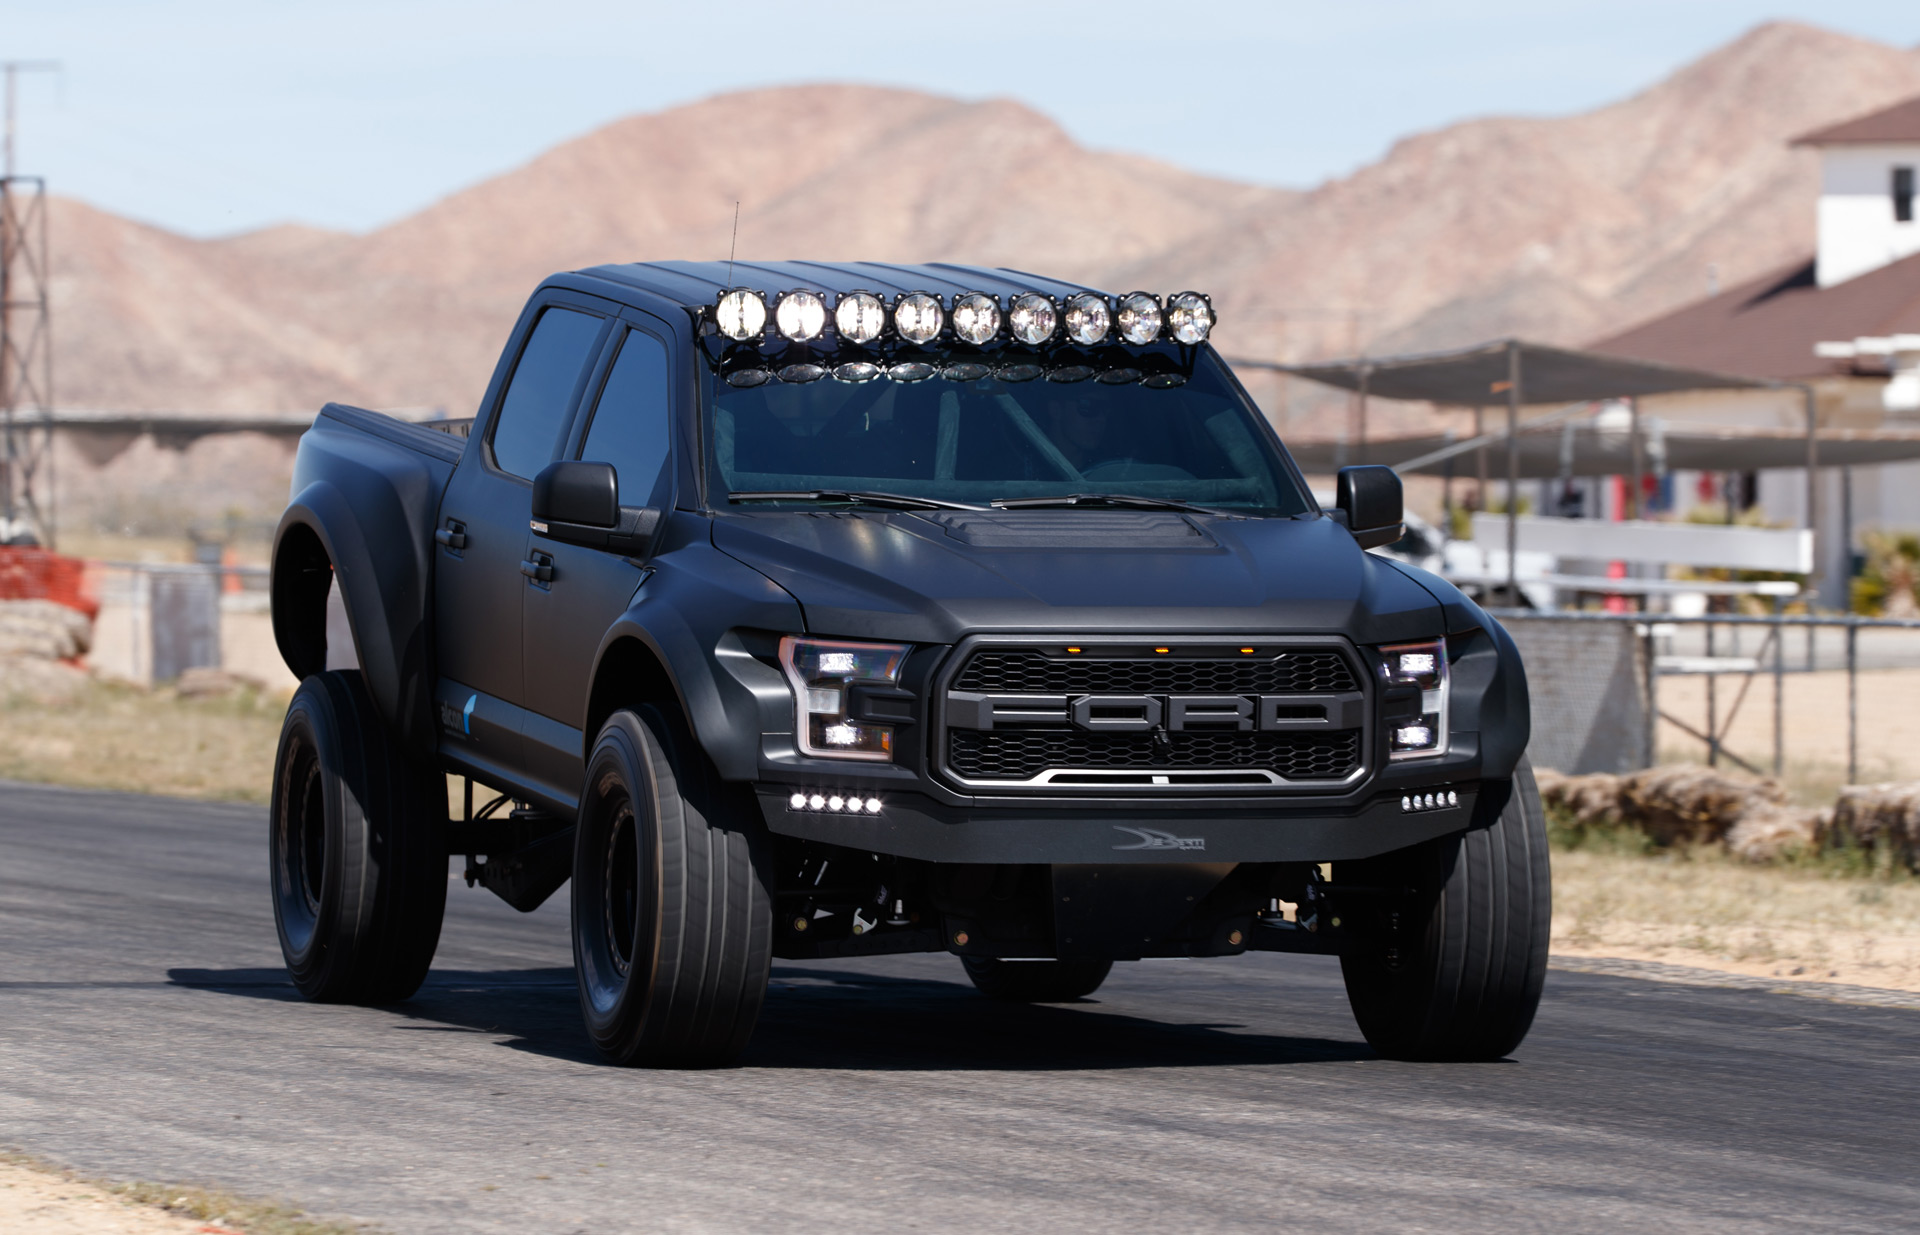 Alcon has a powerful brake upgrade for the Ford F-150 Raptor